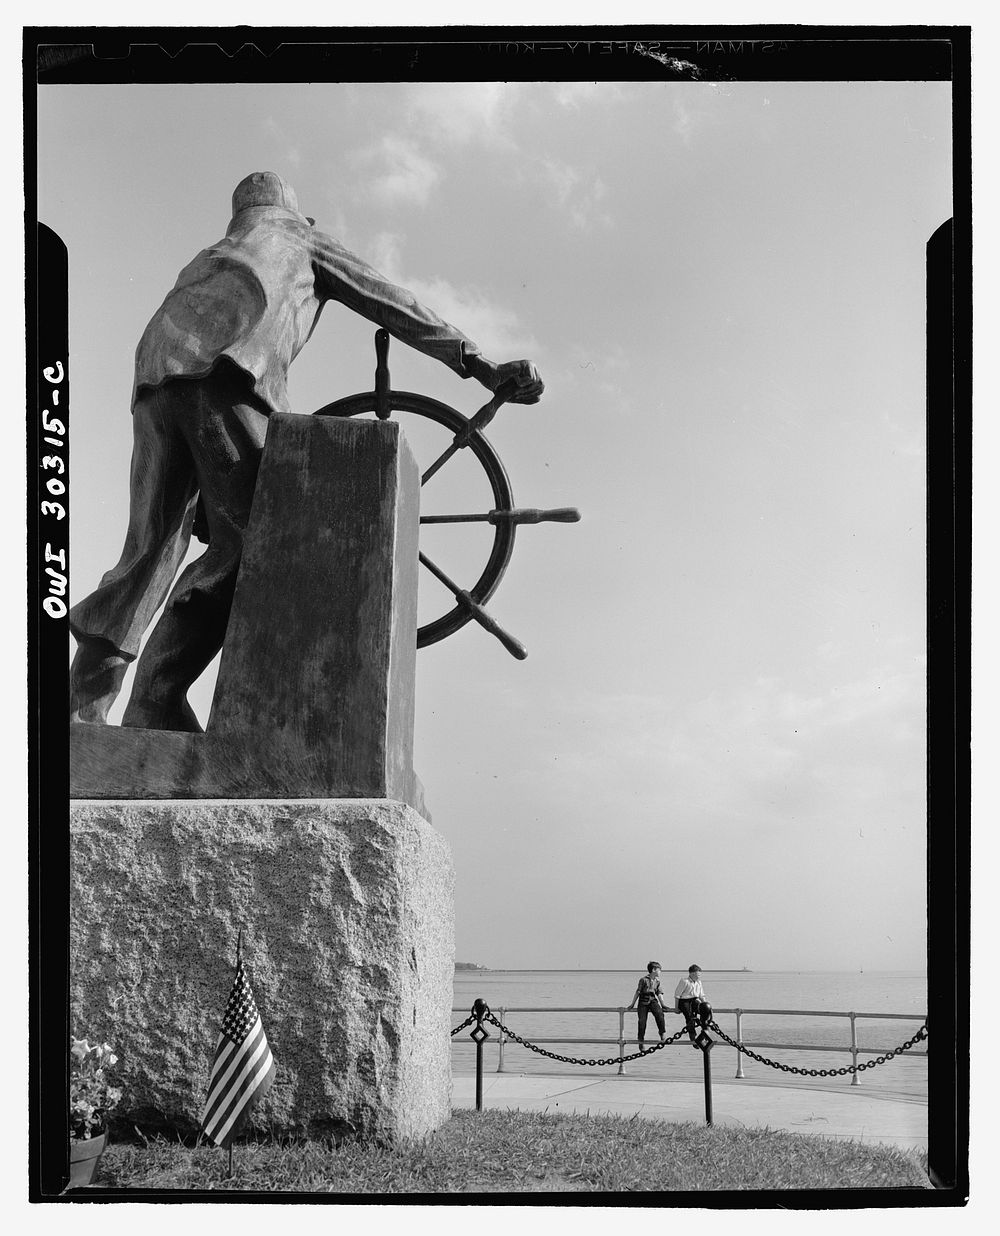 Gloucester, Massachusetts. The bronze fisherman, a memorial to men lost at sea. Each year flowers are placed at the feet of…